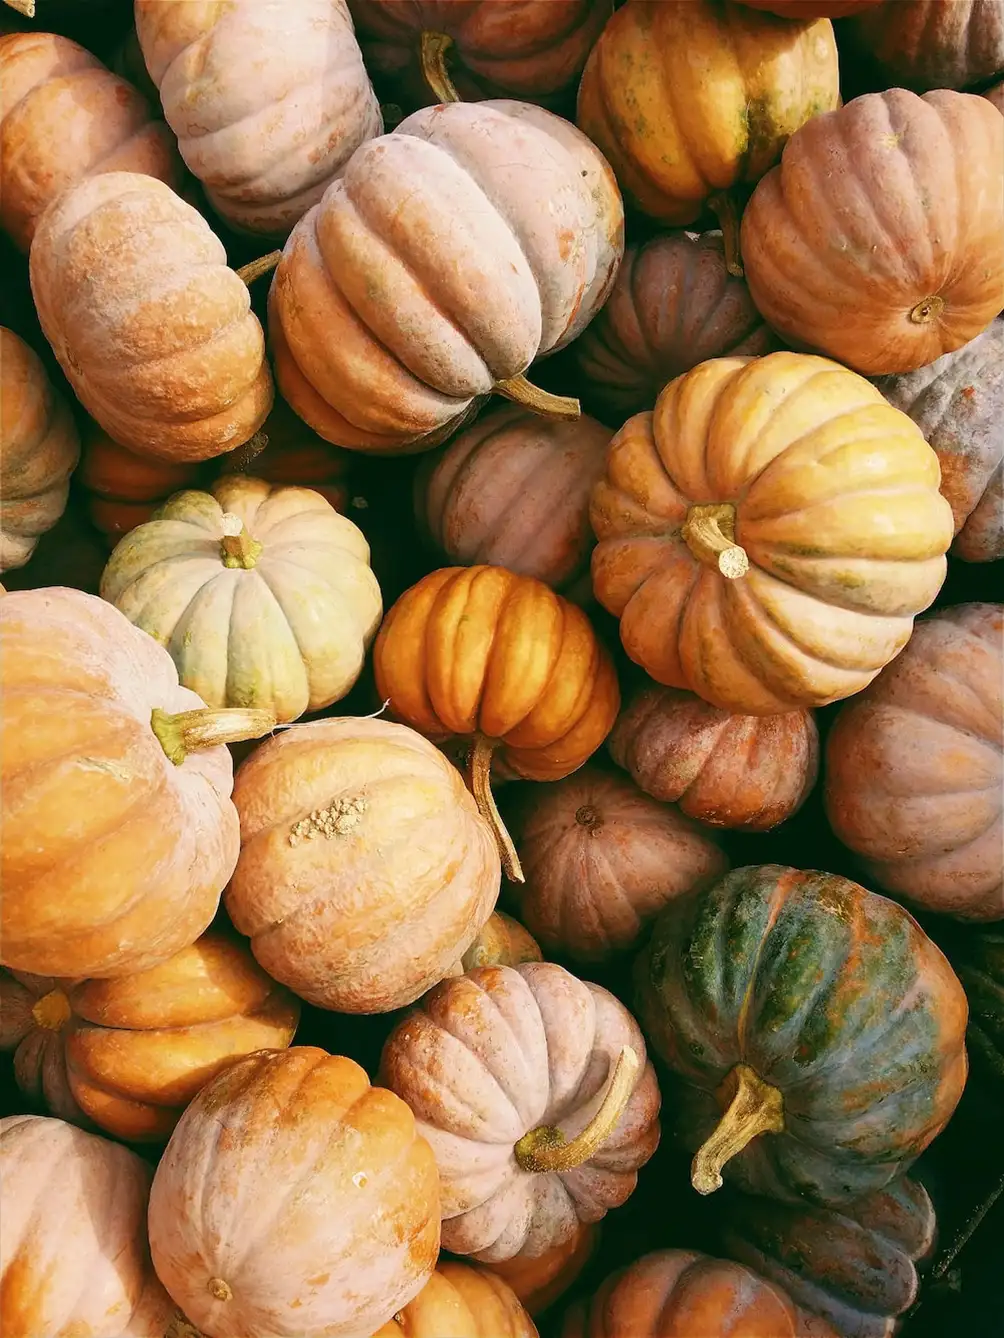 Source: Kerstin Wrba / unsplash  Native Americans used to pray for a good harvest on Thanksgiving